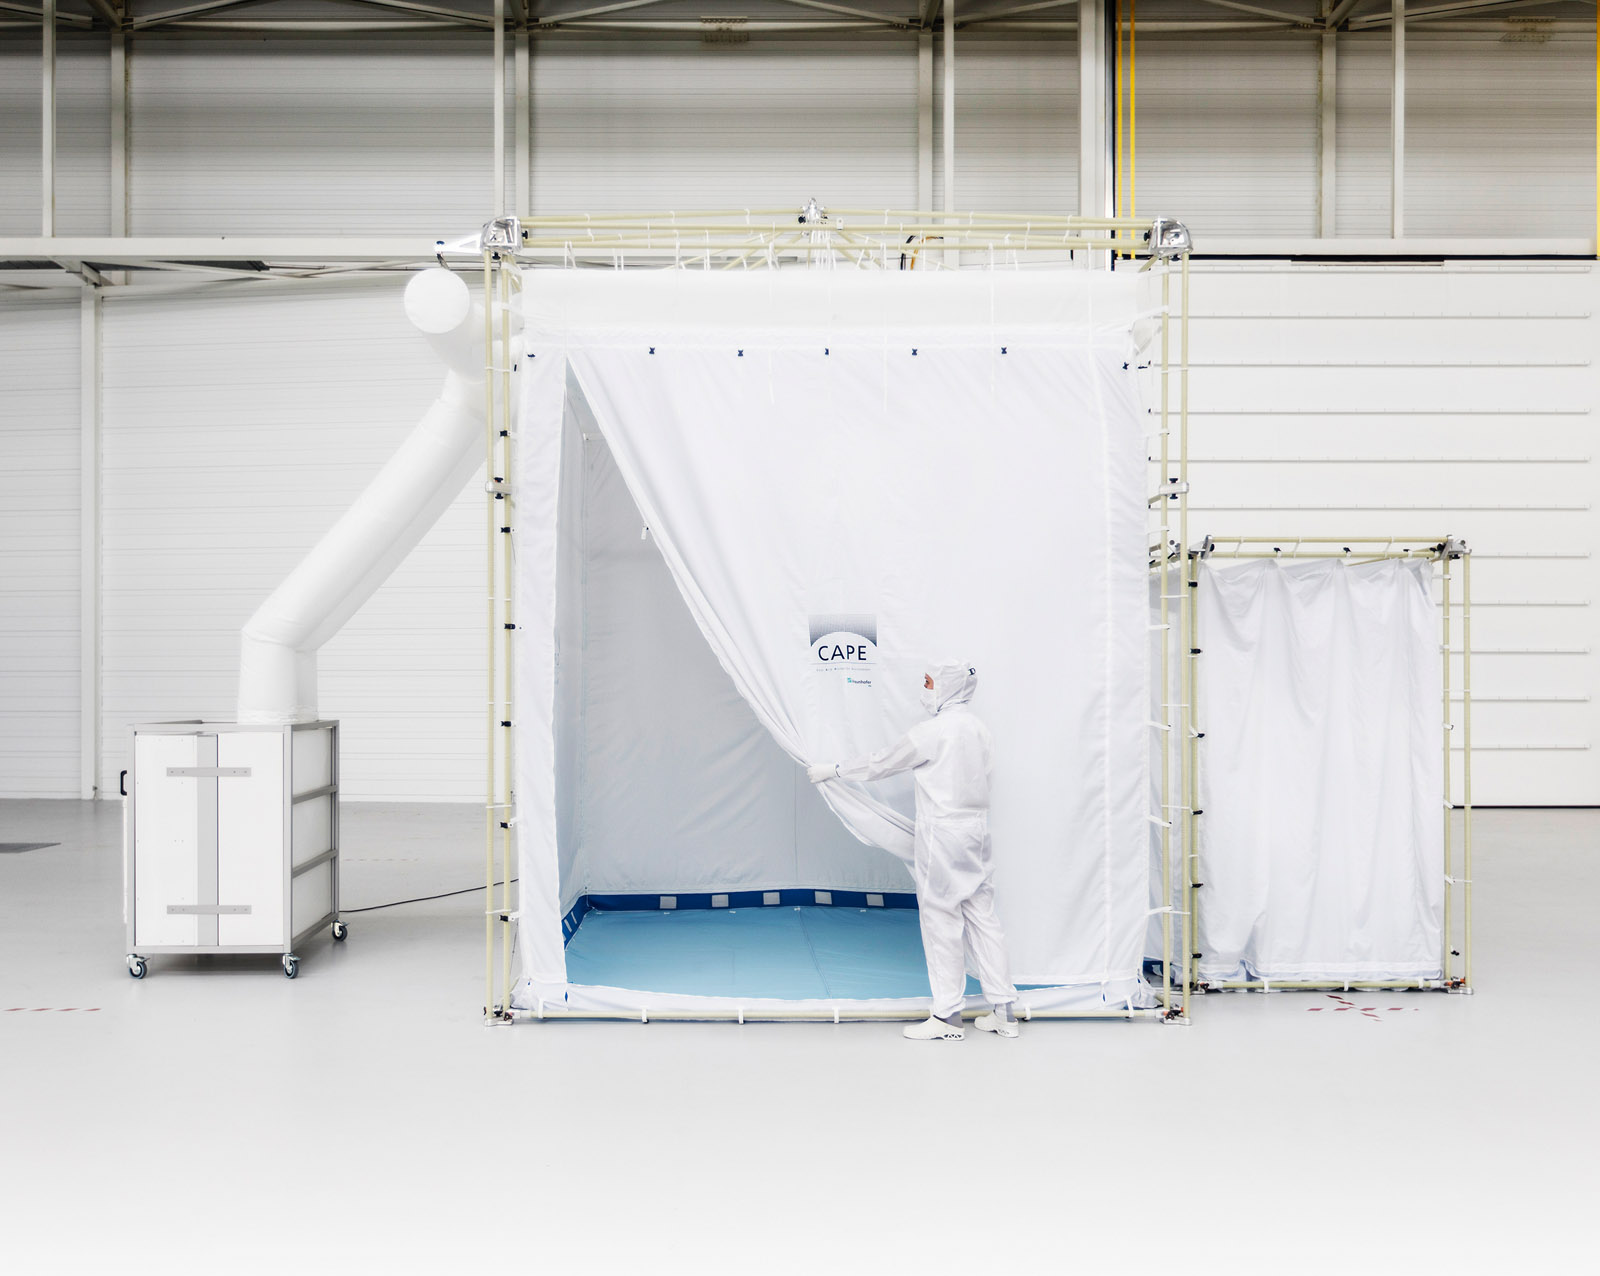 CAPE® is as flexible as a tent, providing an ultra-clean manufacturing environment that complies with air cleanliness standards all the way up to ISO class 1.